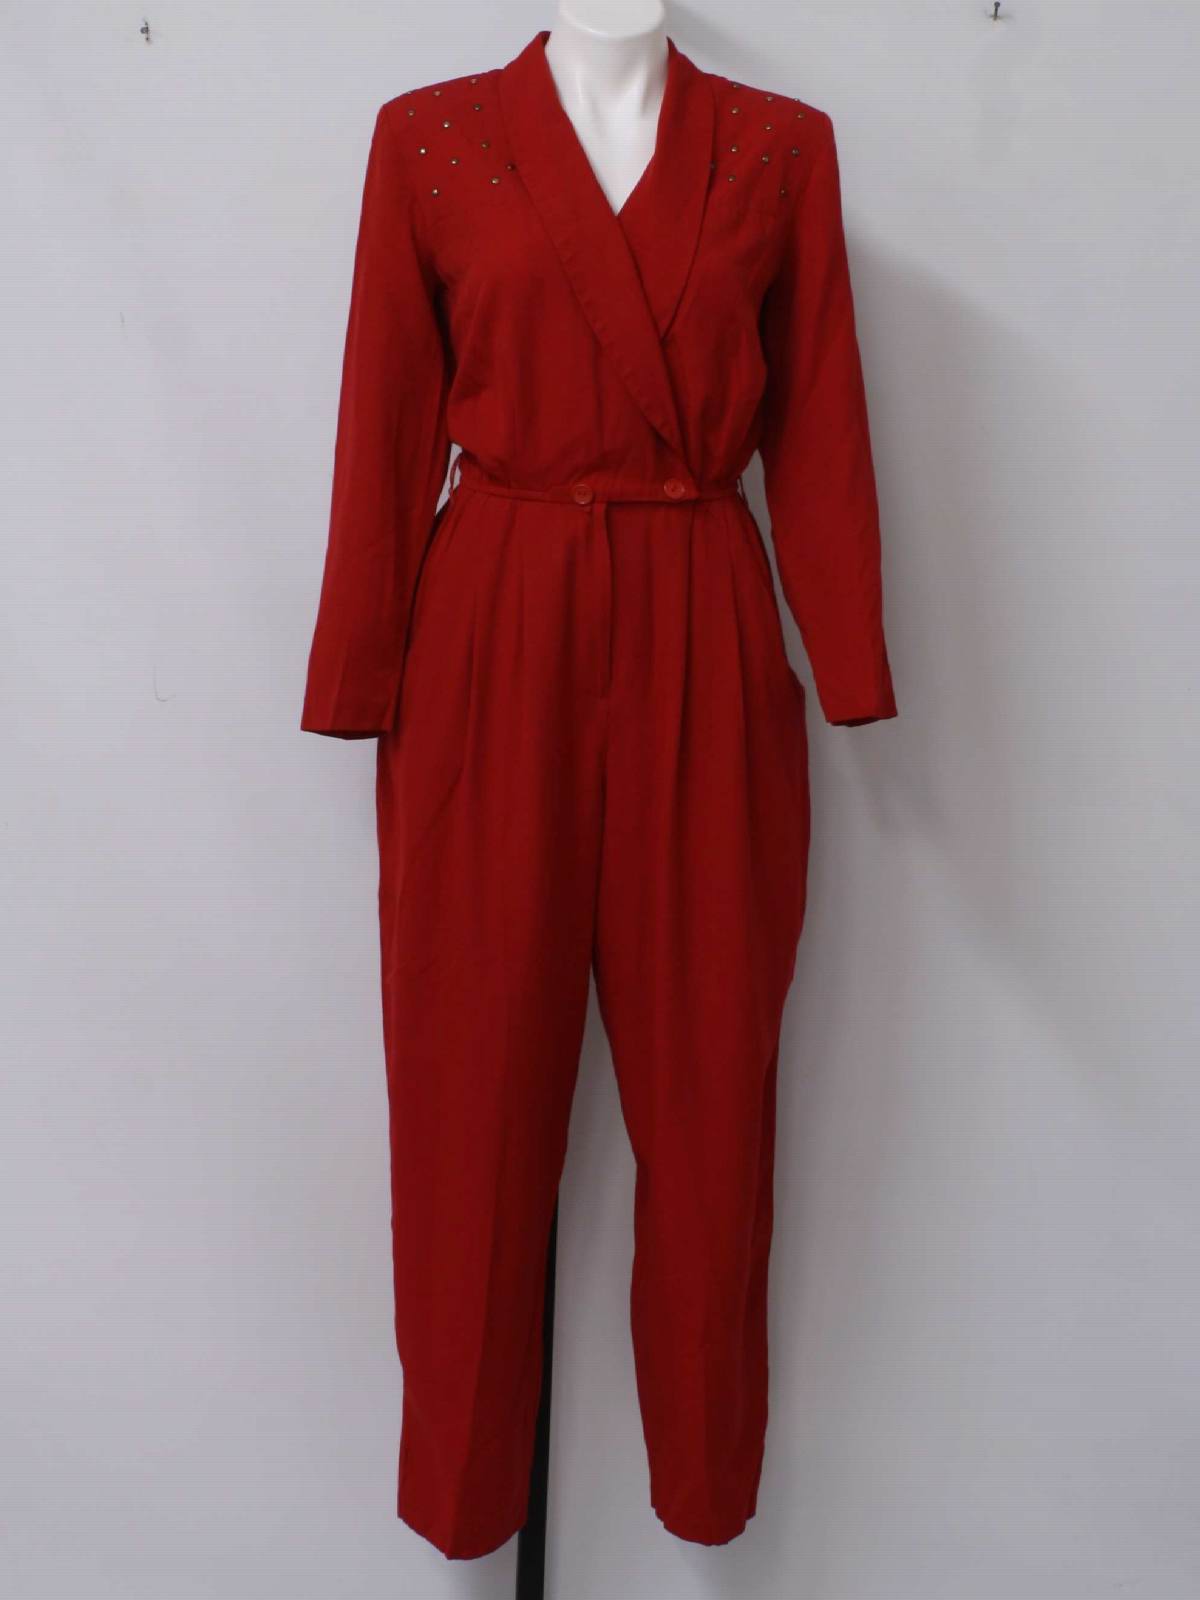 1980s Vintage Suit: 80s -KathieLee- Womens red, blended rayon ...